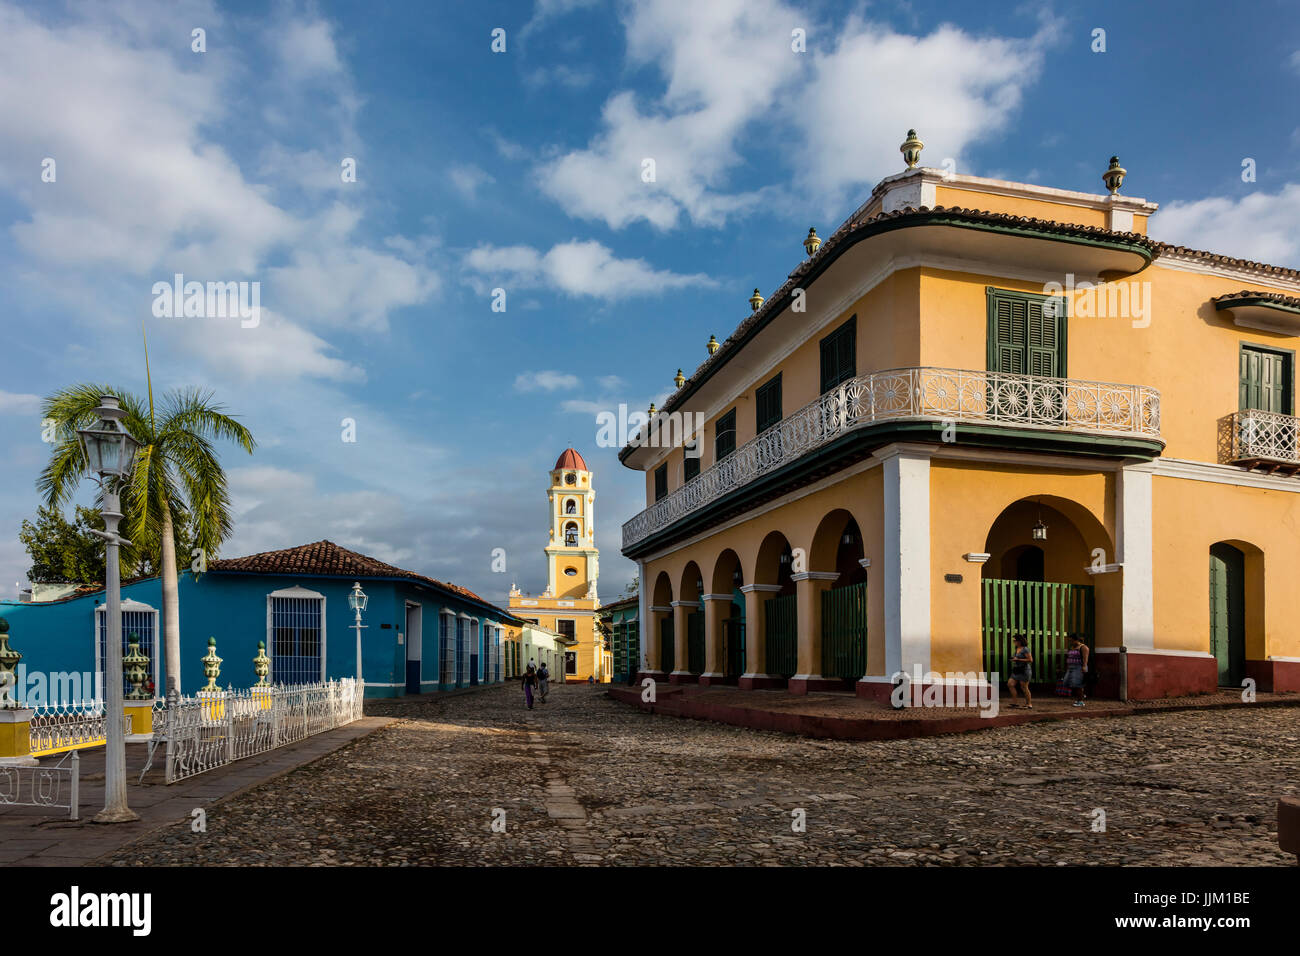 The MUSEO ROMANTICO is housed in the former PALACIO BRUNET on the PLAZA MAYOR - TRINIDAD, CUBA Stock Photo